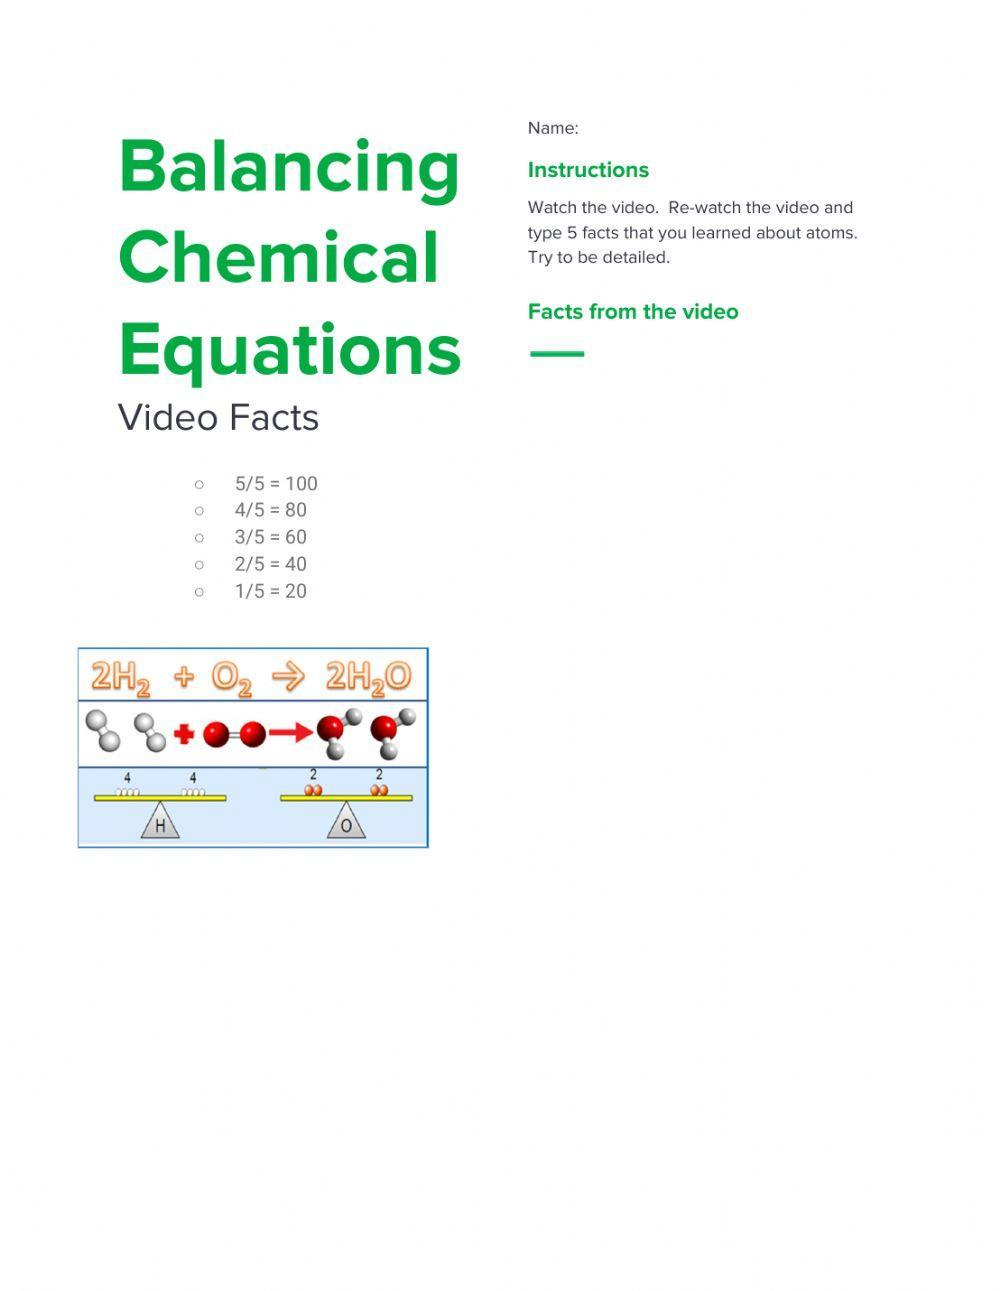 Balancing Chemical Equations Video Facts